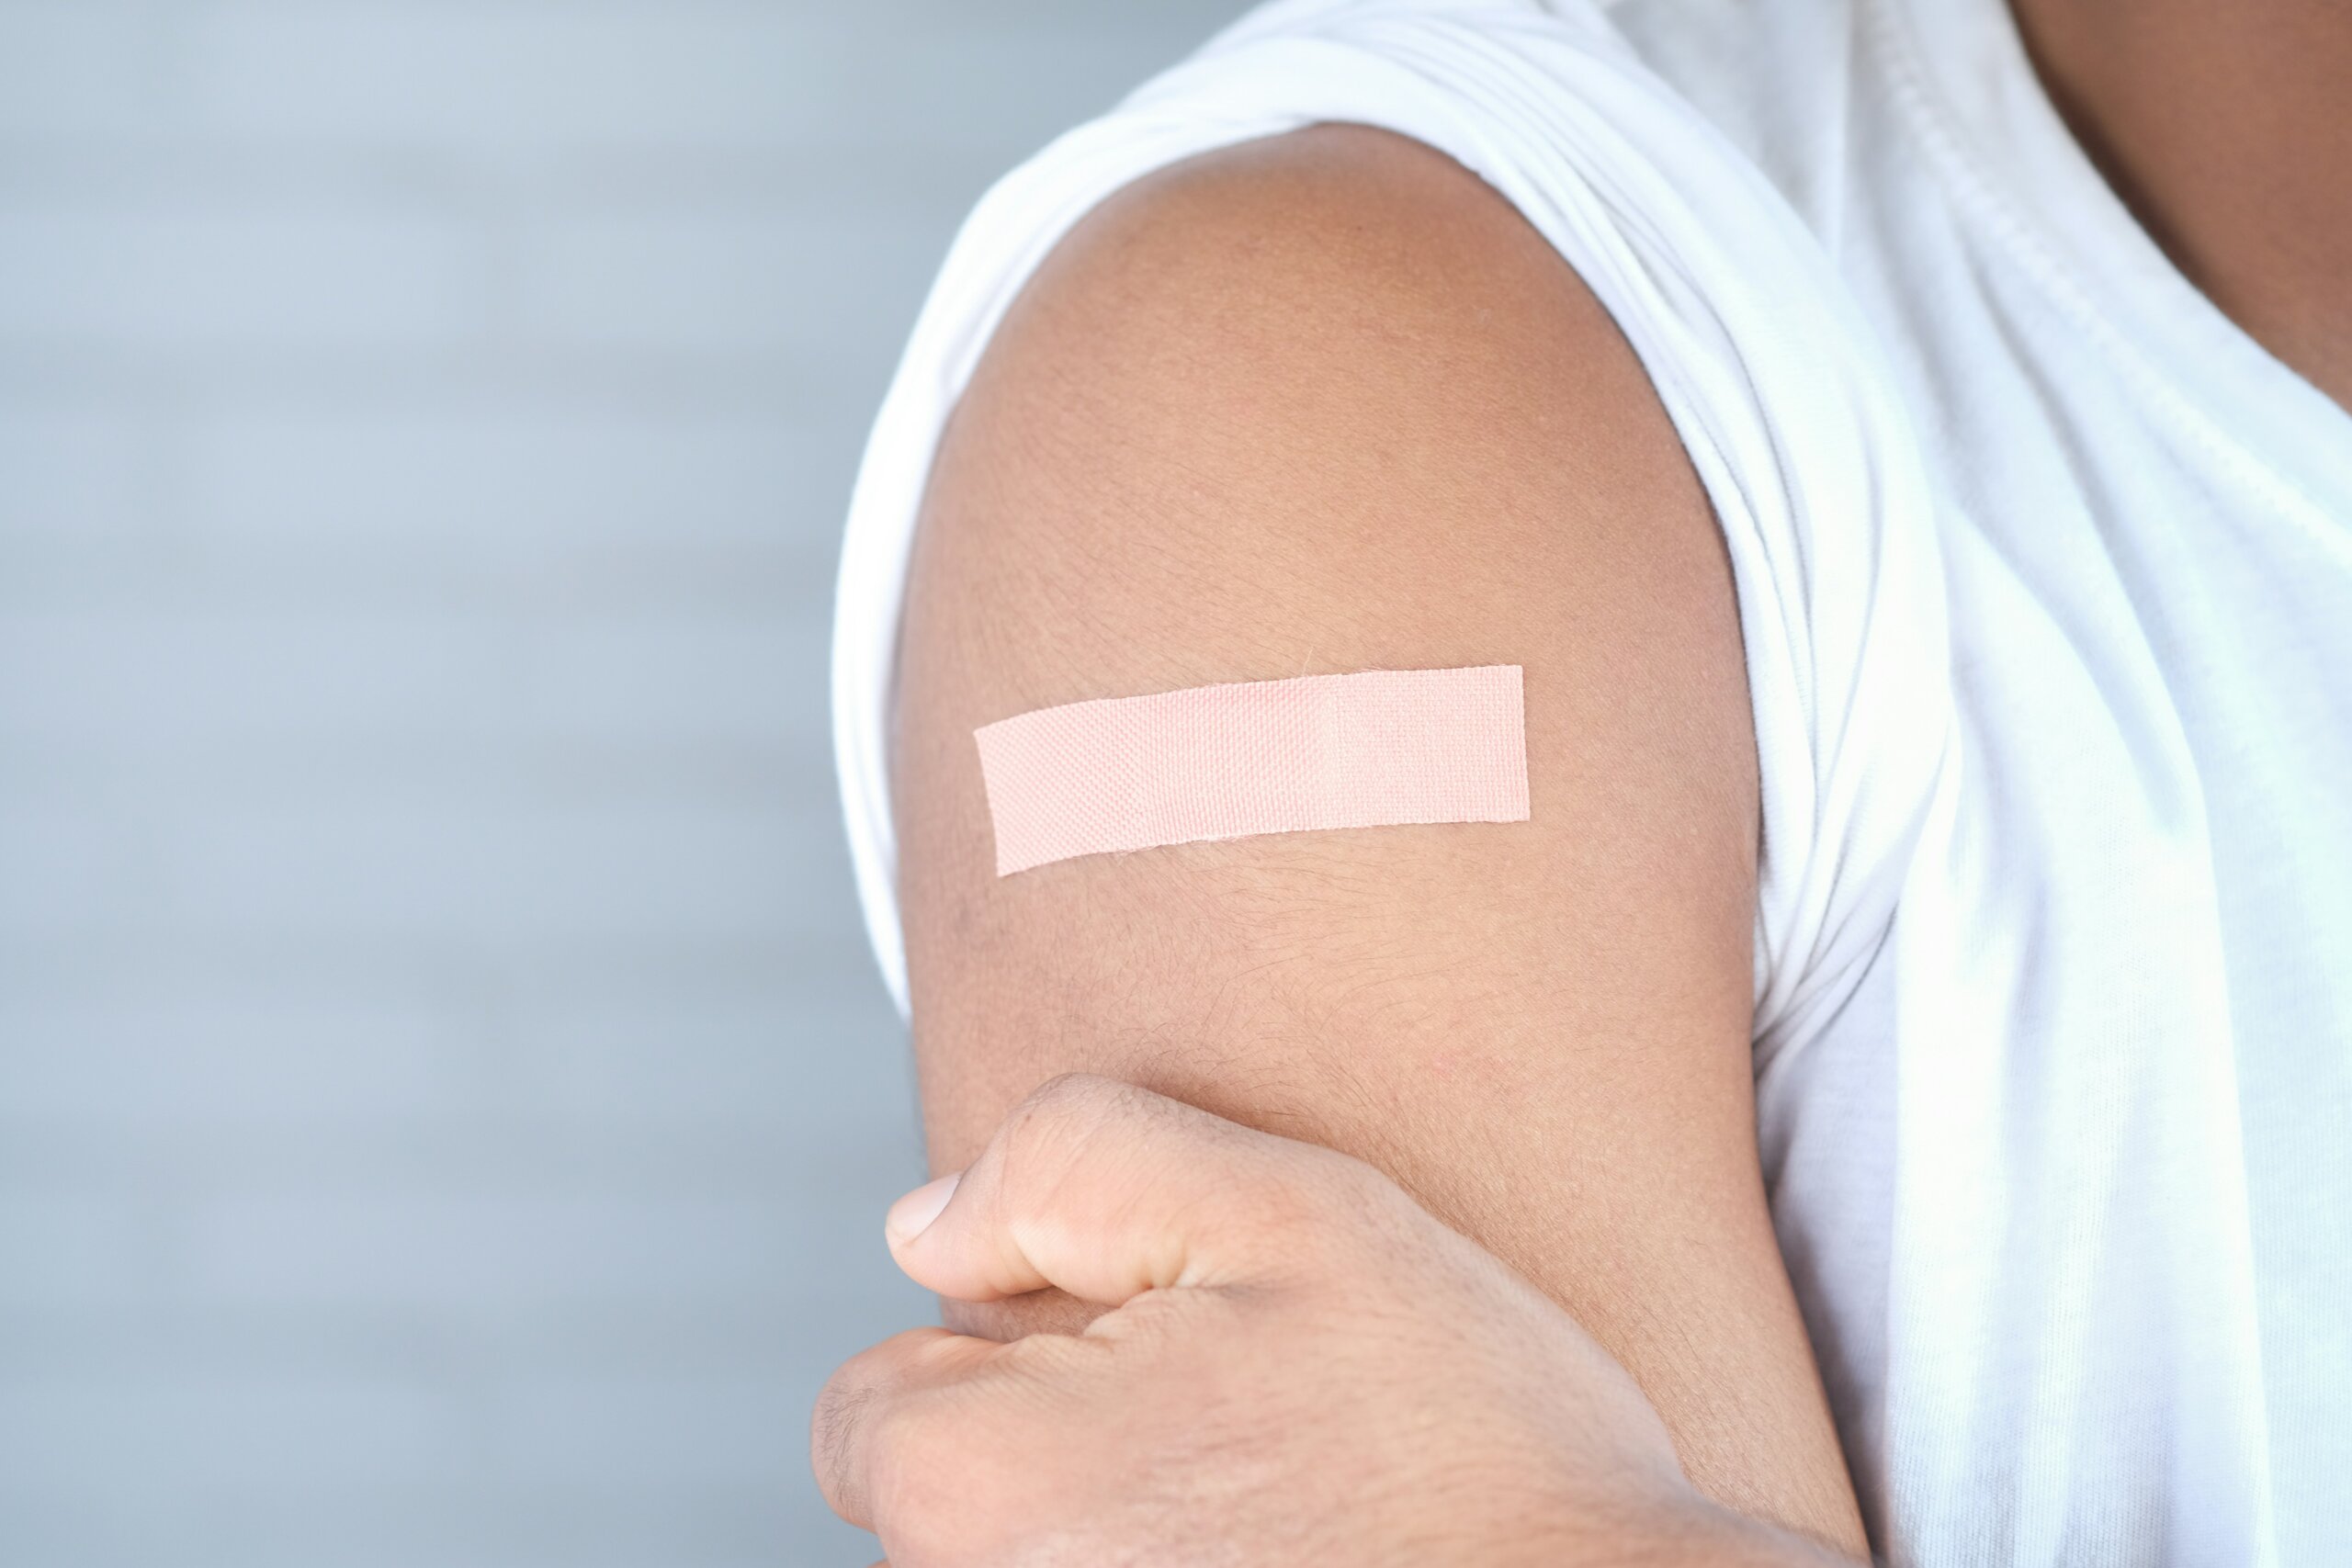 A person’s arm dressed with medical tape